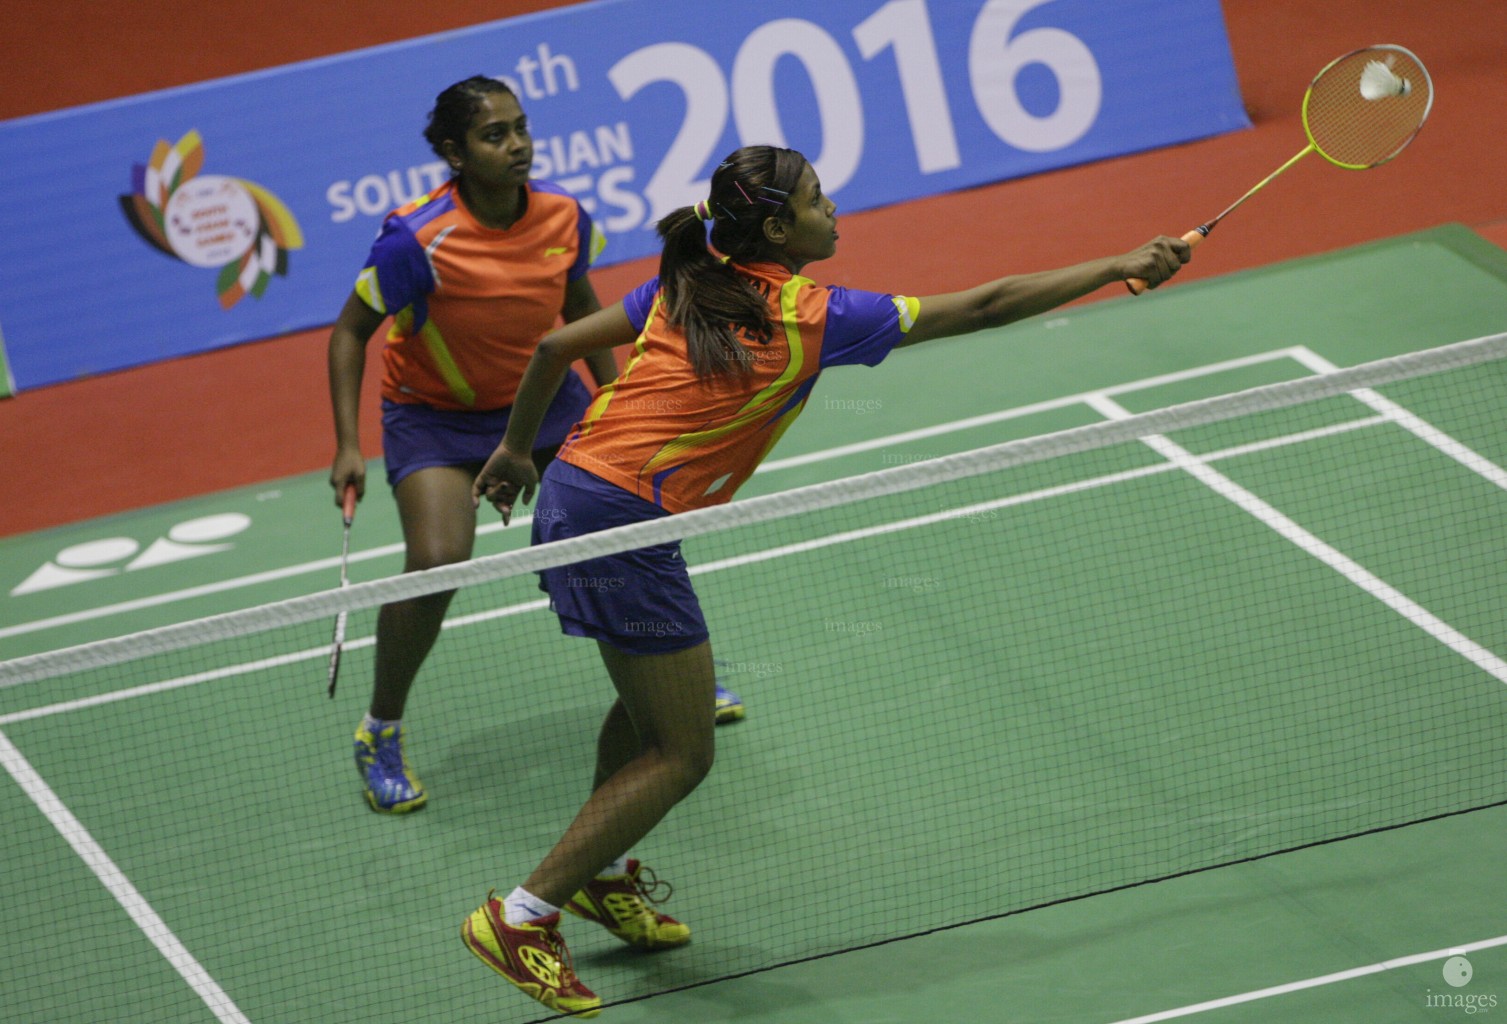 Day 3 of Maldives Badminton matches in the South Asian Games in Shillong, India 2016 (Images.mv Photo: Mohamed Ahsan)